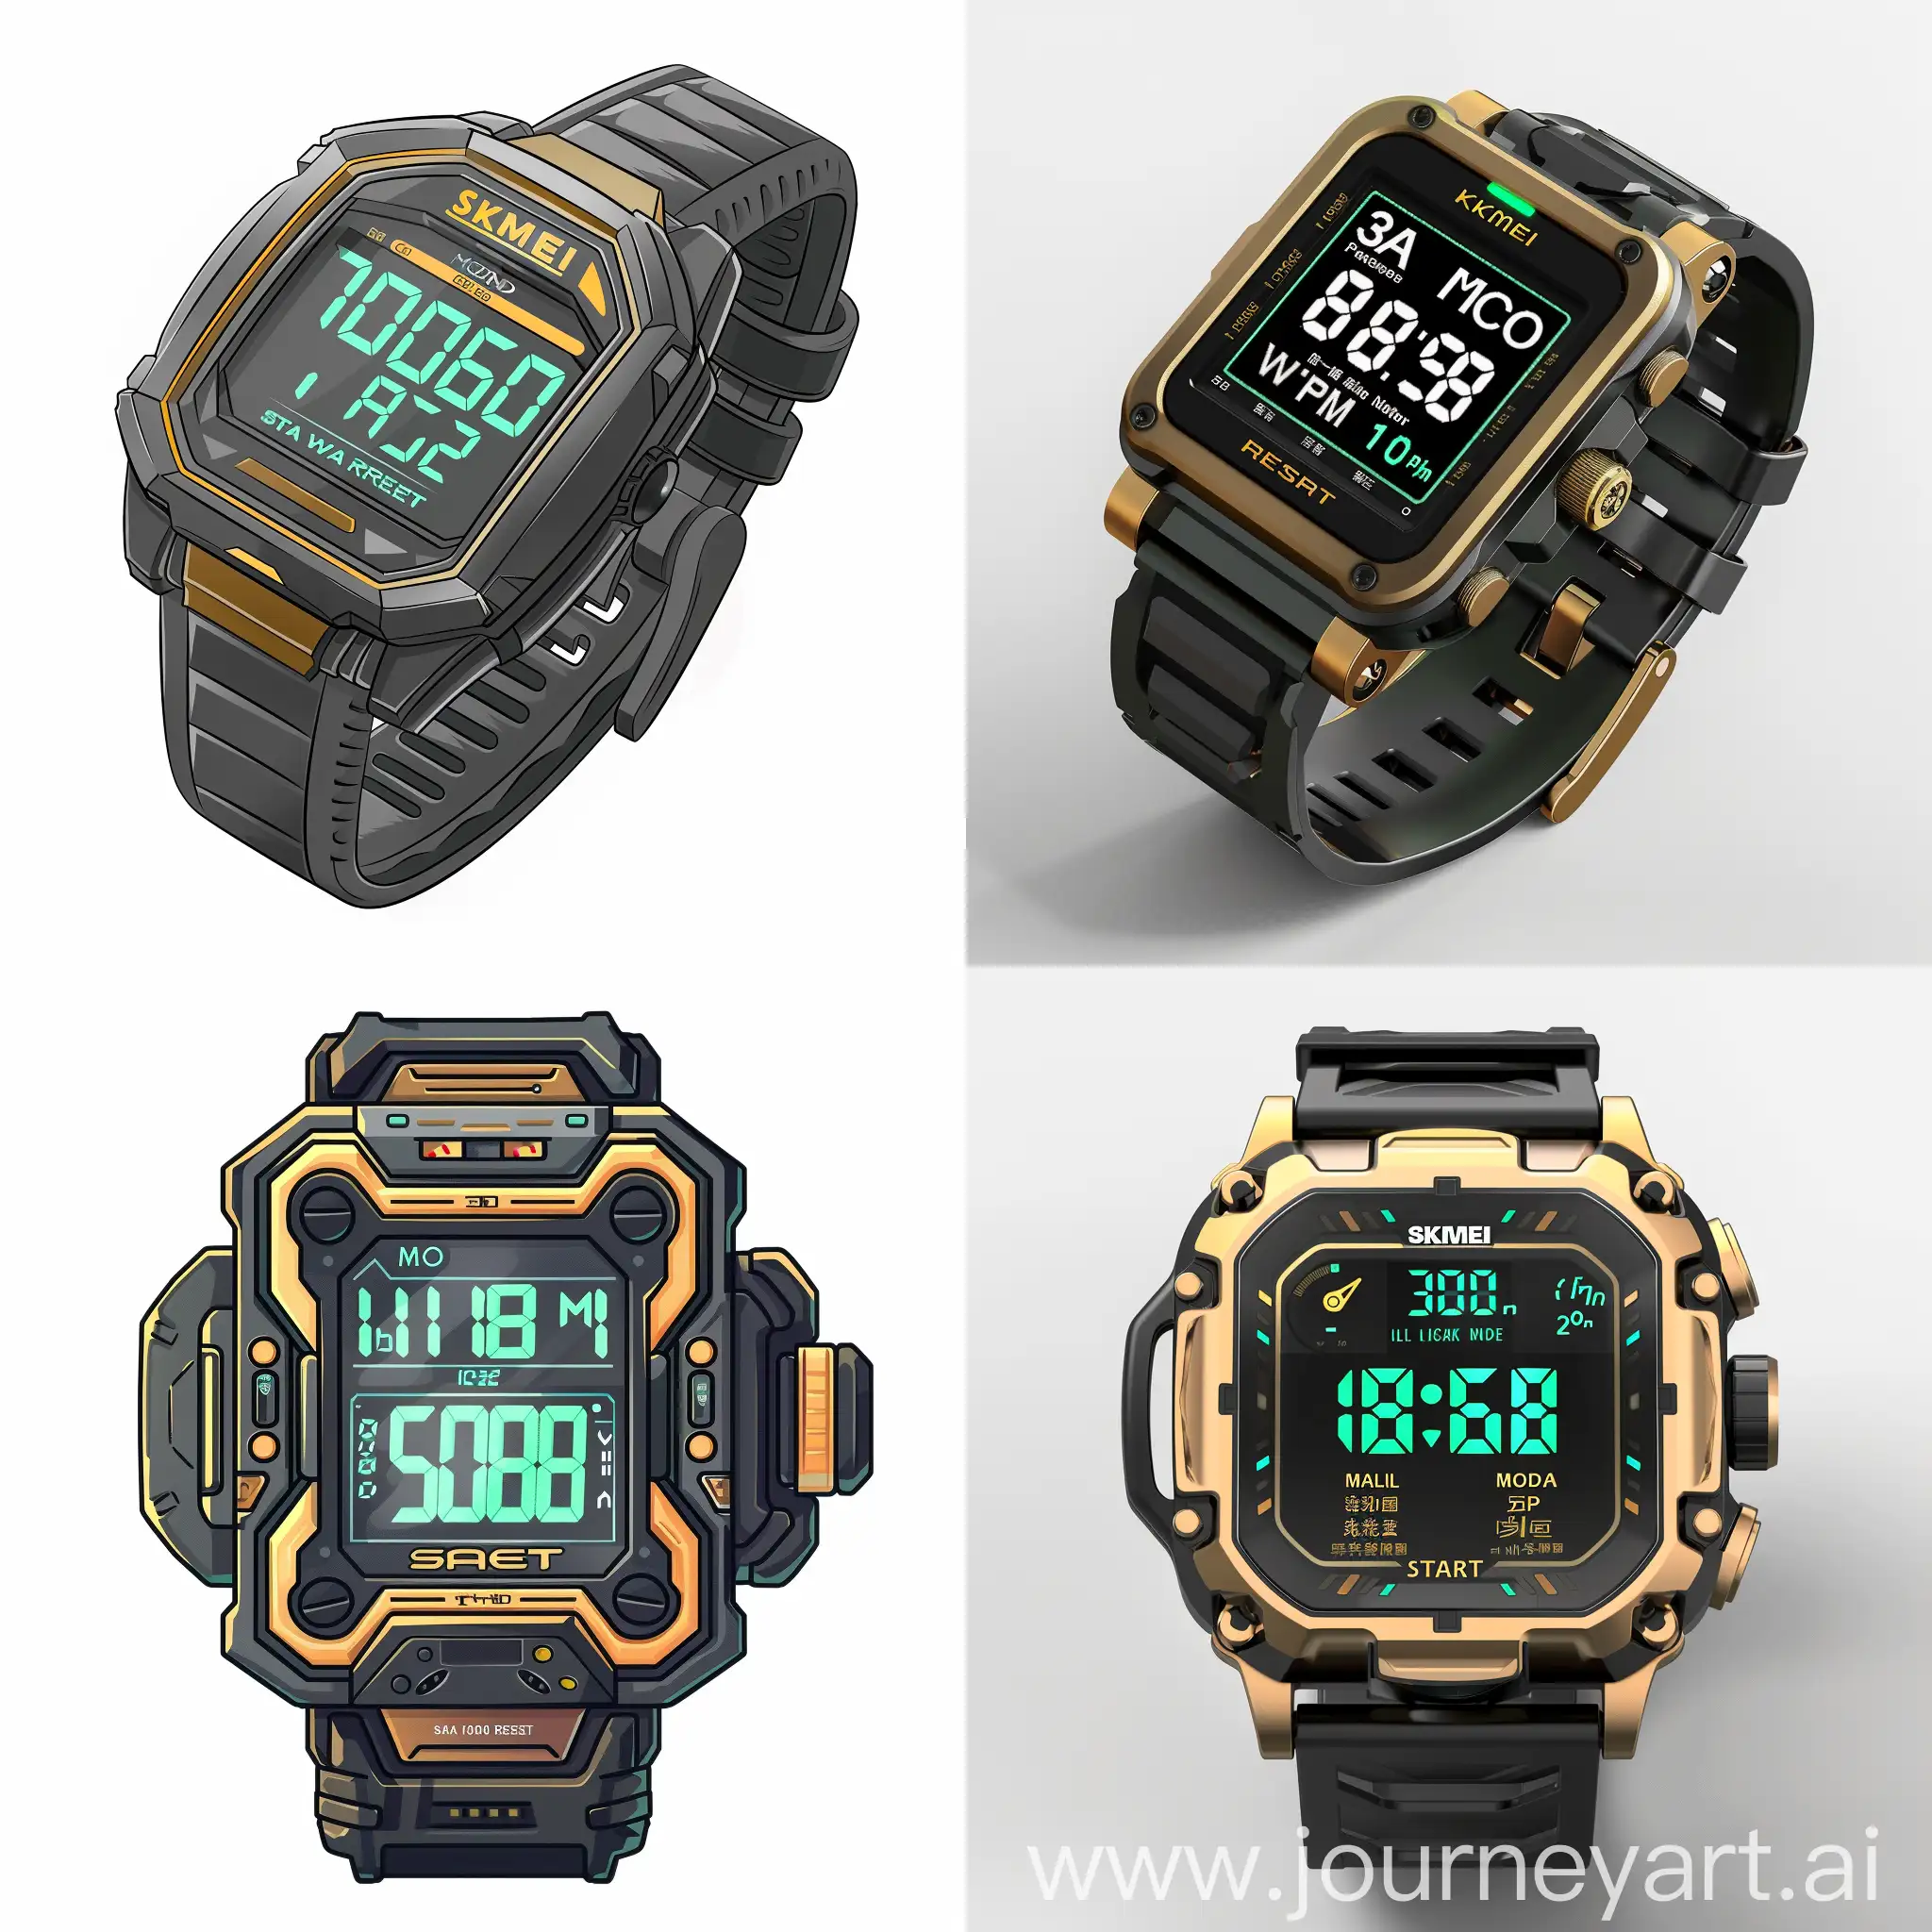 Generate a photo of a digital wristwatch with the following features:

1. Watch Brand and Model:
   - The brand "SKMEI" displayed prominently at the top of the watch face in gold text.

2. Watch Face:
   - The display should be rectangular with rounded edges, featuring a black background.
   - The main digital display should show the current time in large green numbers ("10:50").
   - The top left of the watch face should show the day ("SA") and the date ("10-20").
   - The top right corner should display a small battery icon and "36" seconds in green.
   - The letter "P" should be shown on the left side of the time, indicating PM.
   - Below the time, there should be a small "AL" icon indicating the alarm function.

3. Watch Text and Icons:
   - The words "30M WATER RESIST" should be printed at the bottom of the watch face in gold text.
   - On the left side of the watch face, there should be the words "MODE" and "LIGHT" in gold.
   - On the right side of the watch face, there should be the words "START" and "RESET" in gold.

4. Watch Buttons:
   - The watch should have four buttons on the sides, two on each side, with a metallic finish.
   - The buttons should be placed in the following order from top to bottom:
     - Left side: "MODE" and "LIGHT"
     - Right side: "START" and "RESET"

5. Watch Case:
   - The watch case should be metallic, with a brushed steel finish.
   - The case should have a solid, durable appearance with a slightly angular design around the display.

6. Watch Strap:
   - The strap should be black and made of a textured rubber material.
   - The strap should be adjustable with a buckle clasp.

7. Background:
   - The background of the image should be plain white to allow easy removal or editing later.

The image should capture the watch from a slightly angled front view, showcasing the details of the watch face, case, buttons, and strap clearly --ar 1:1 --s 0 --style raw --v 6 